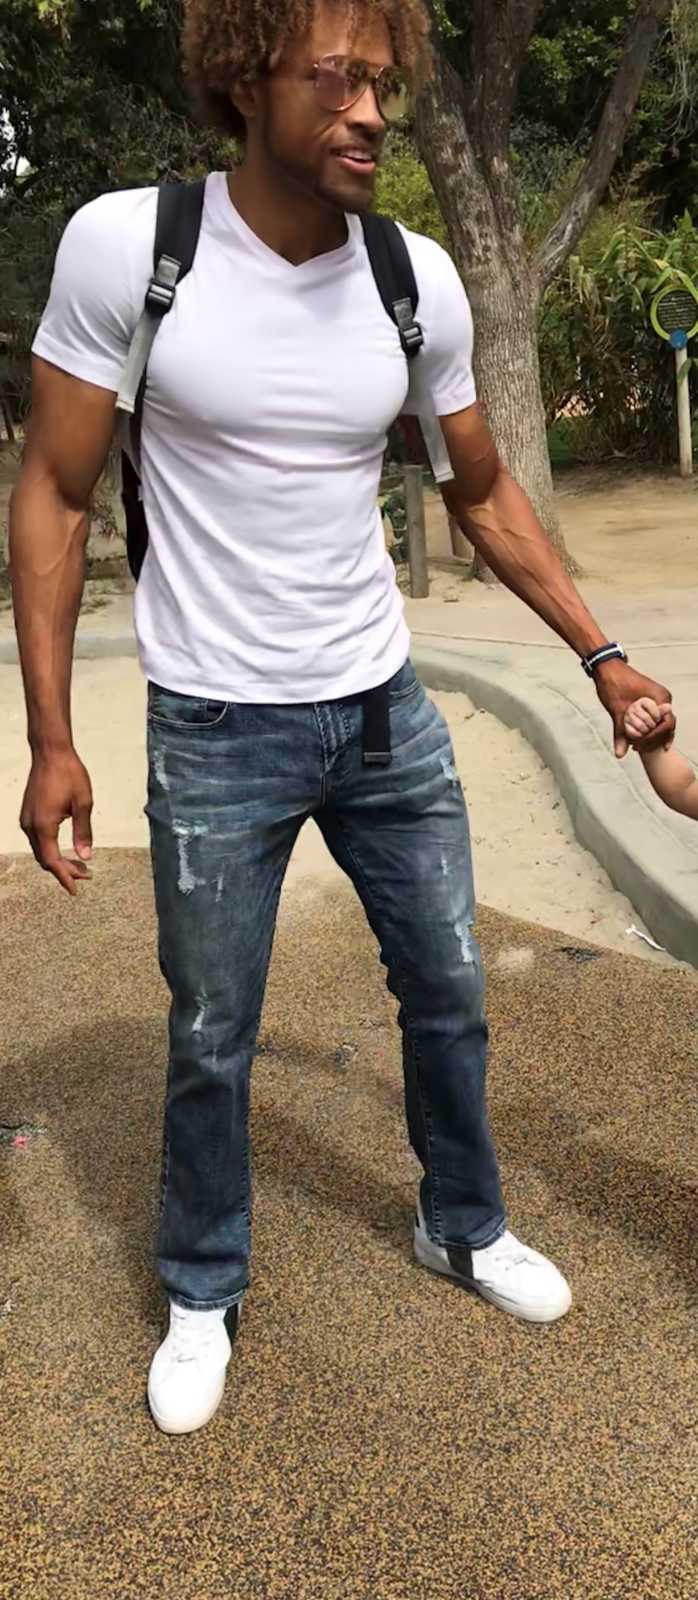 Man looks caught off-guard for a photo while holding a child's hand